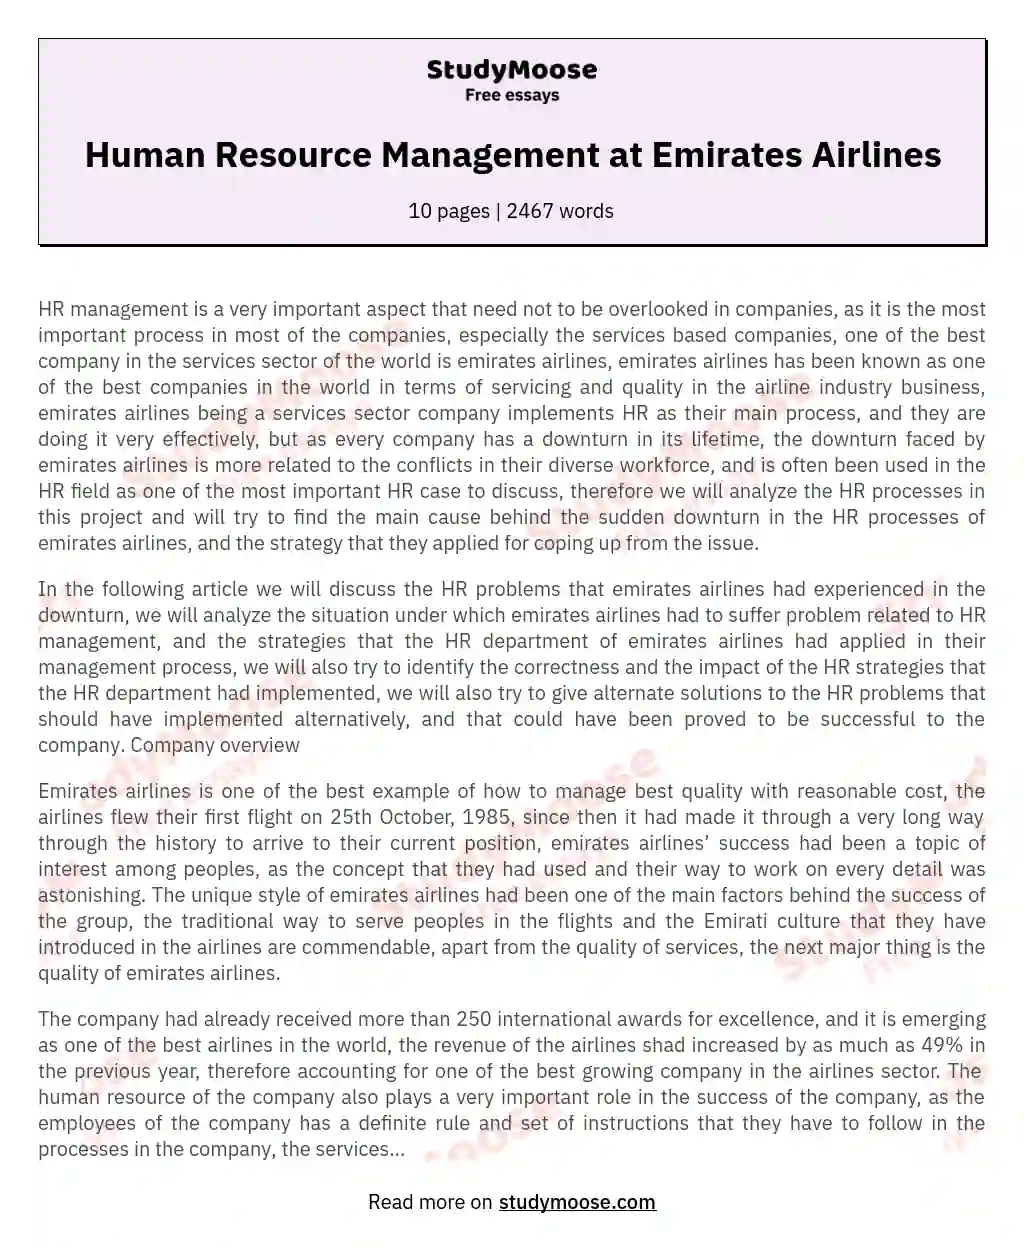 Human Resource Management at Emirates Airlines essay